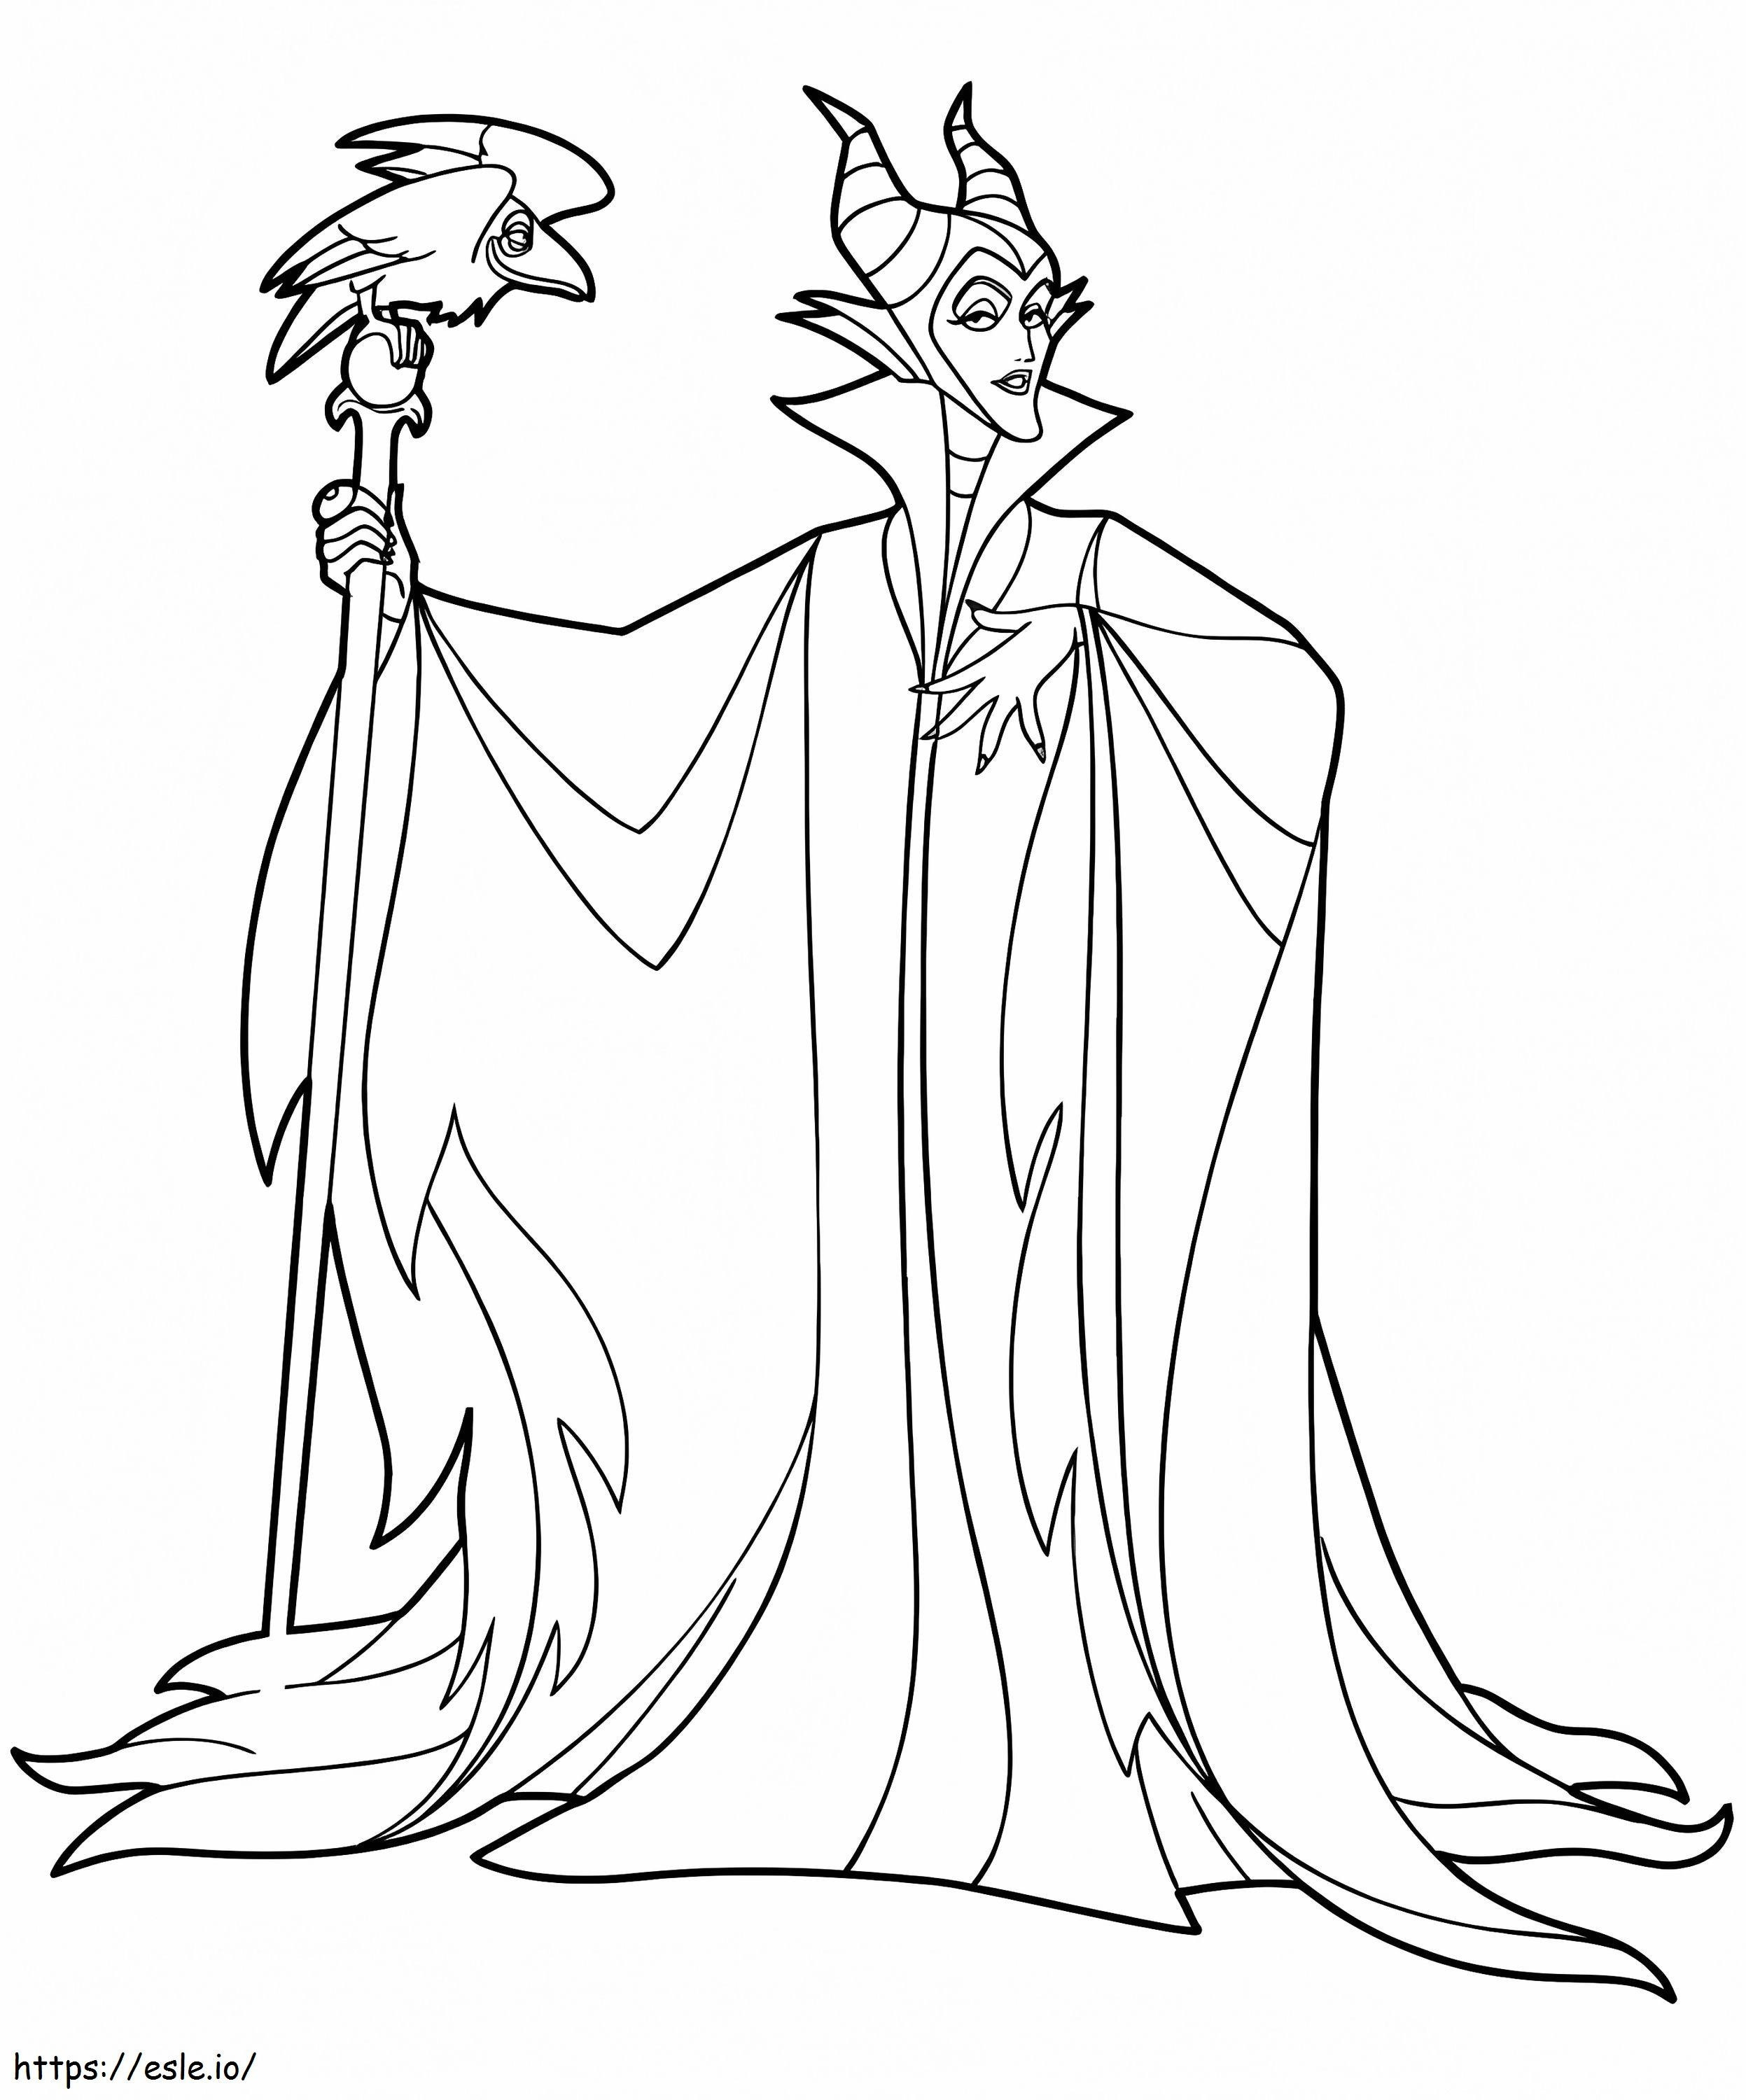 Cartoon Maleficent coloring page